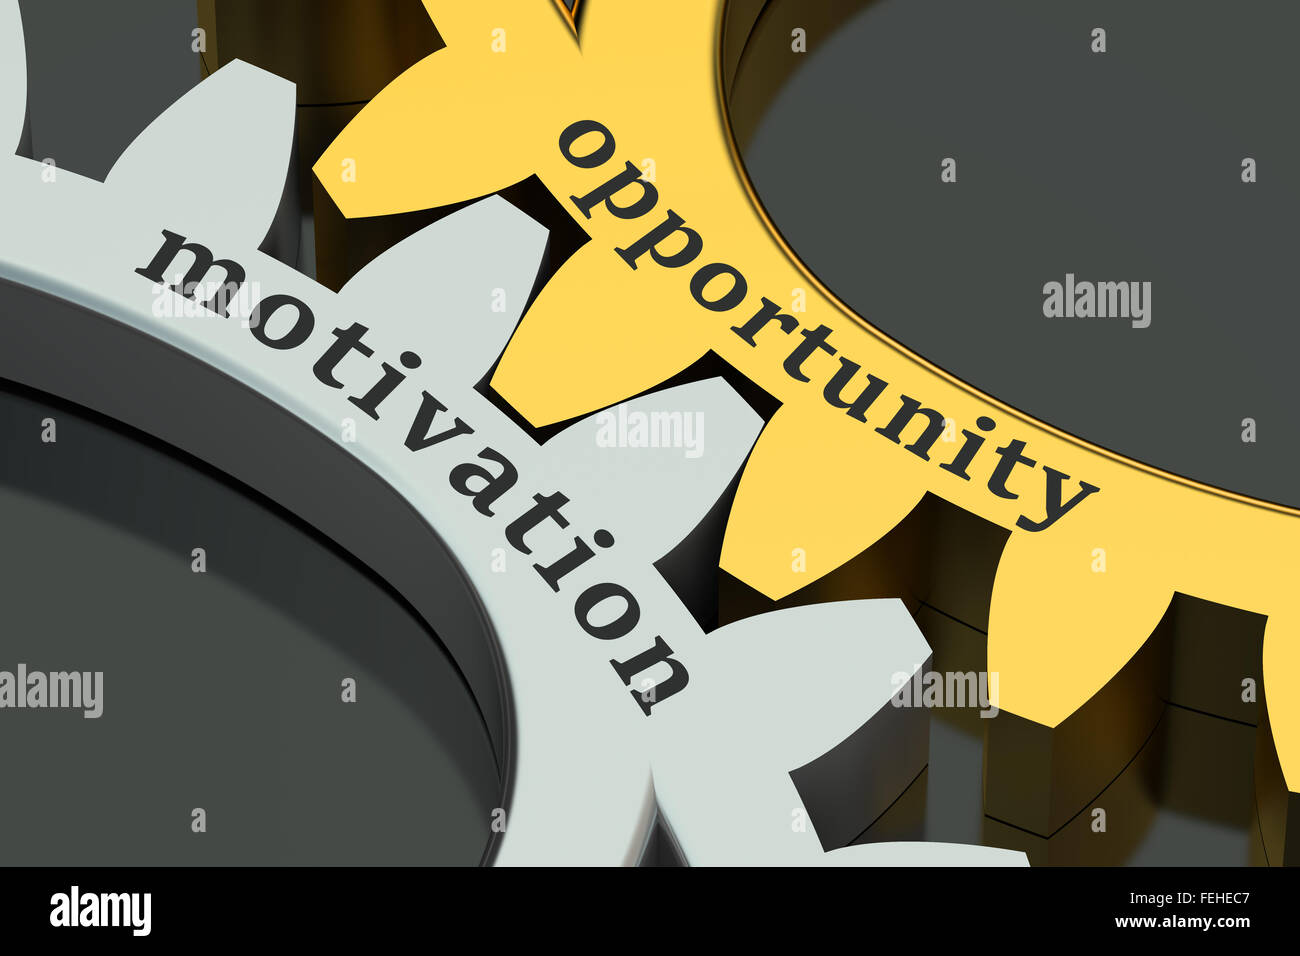 opportunity motivation concept isolated on black background Stock Photo